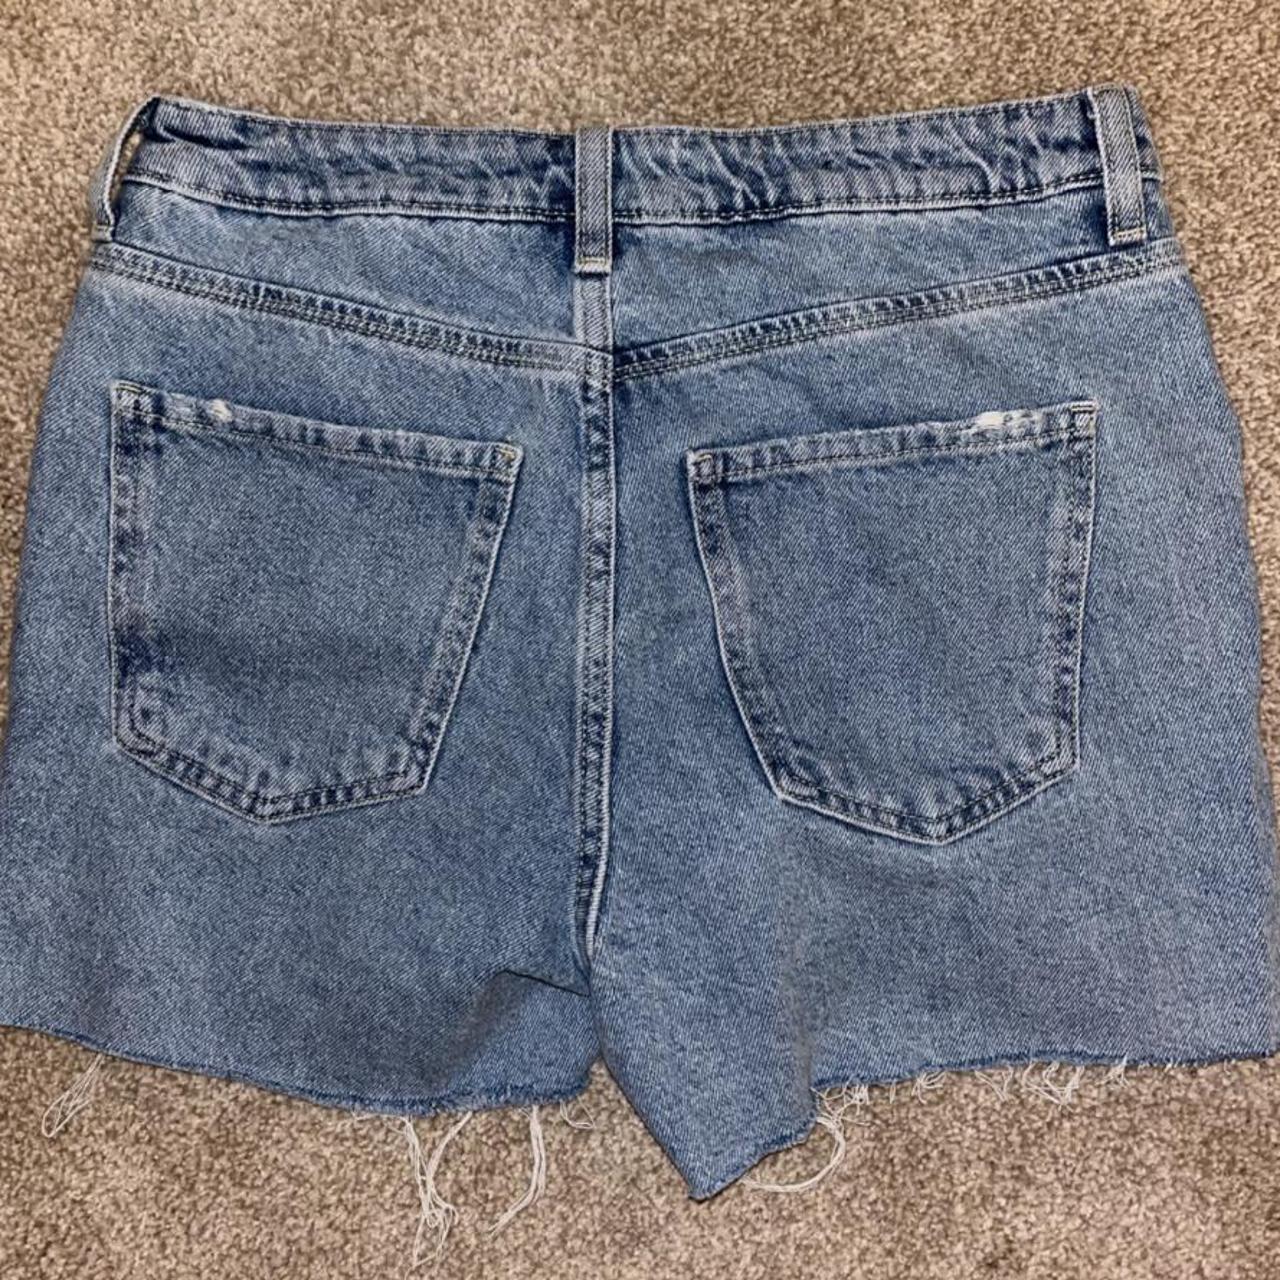 New Look Denim shorts Size 6 Hardly worn so perfect... - Depop